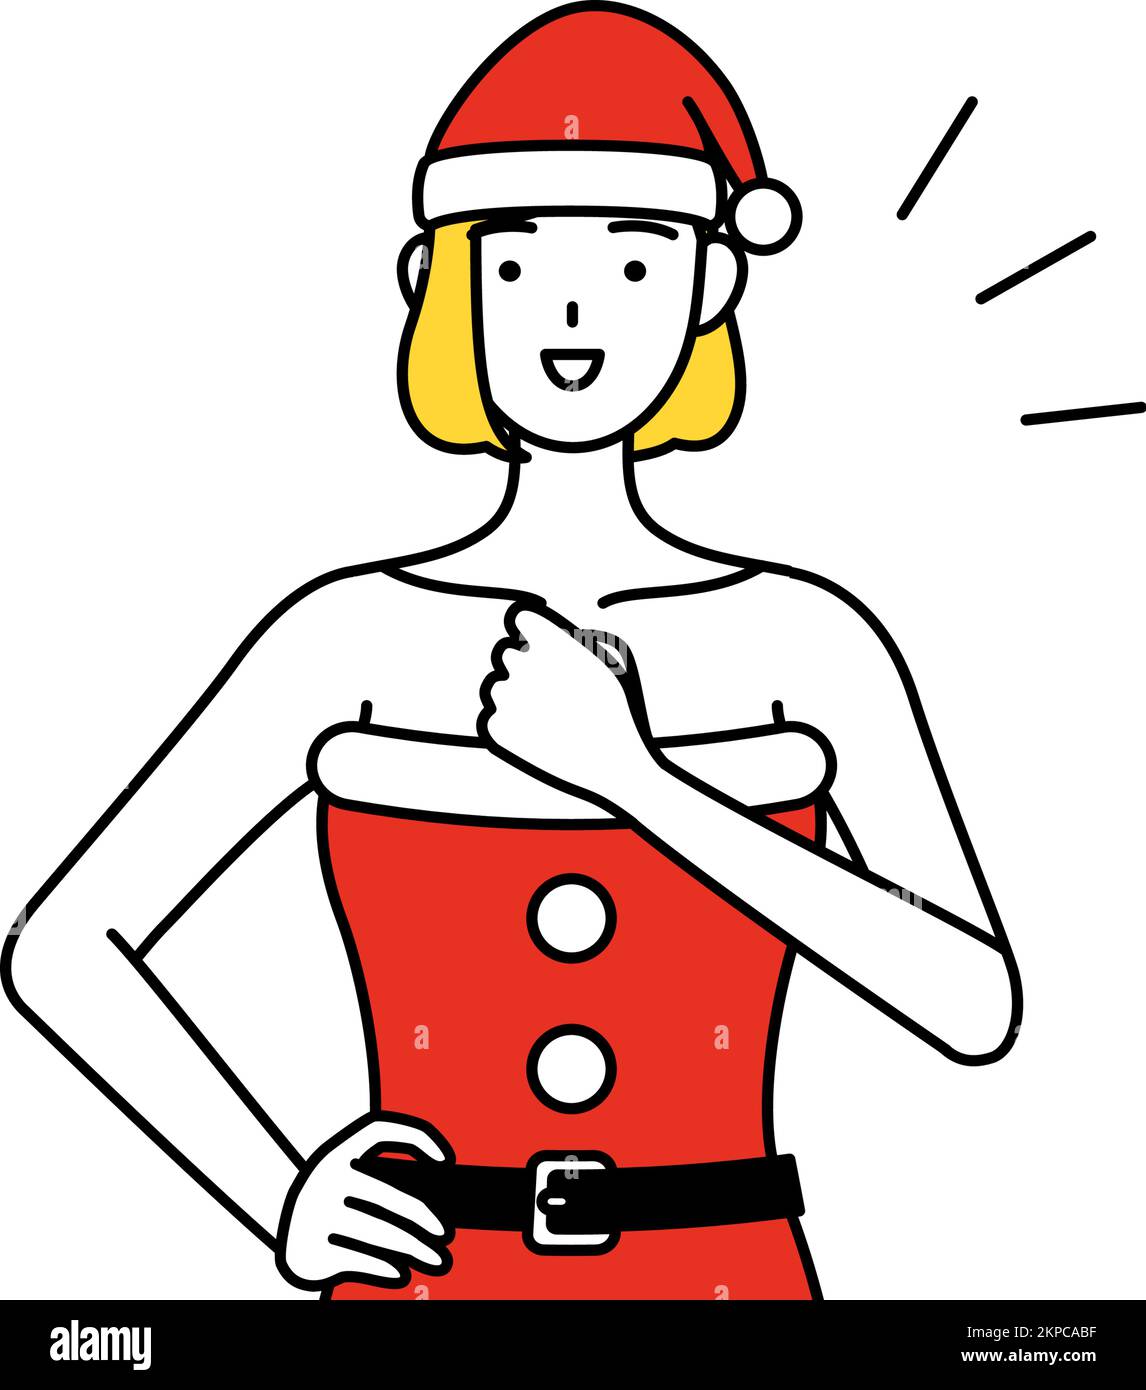 Simple line drawing illustration of a woman dressed as Santa Claus tapping her chest. Stock Vector